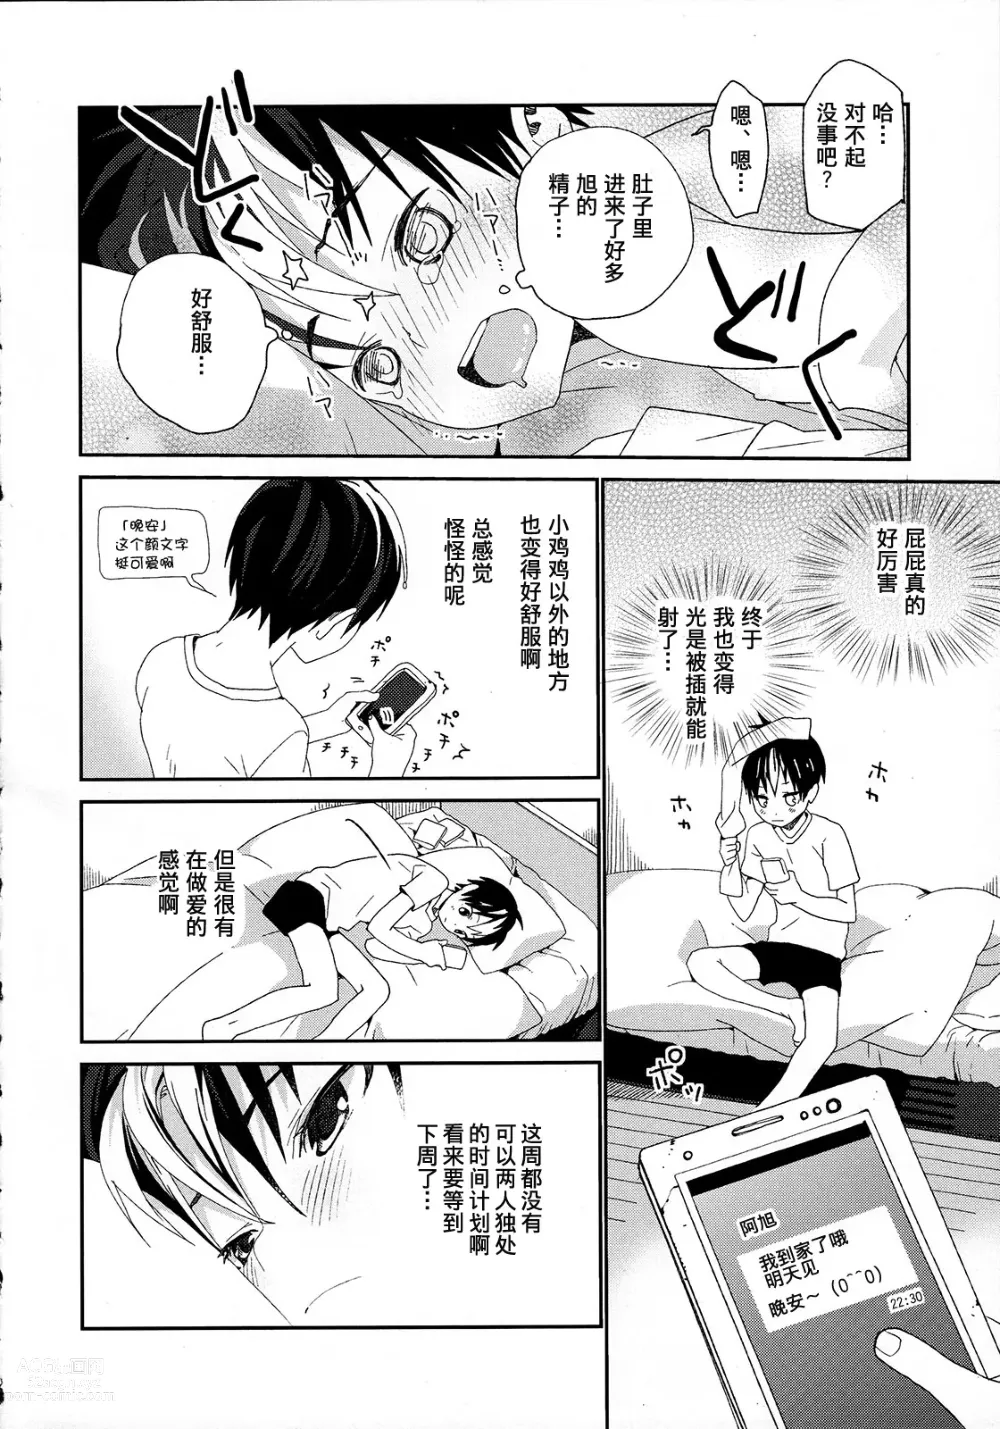 Page 8 of doujinshi 西谷君的发情期